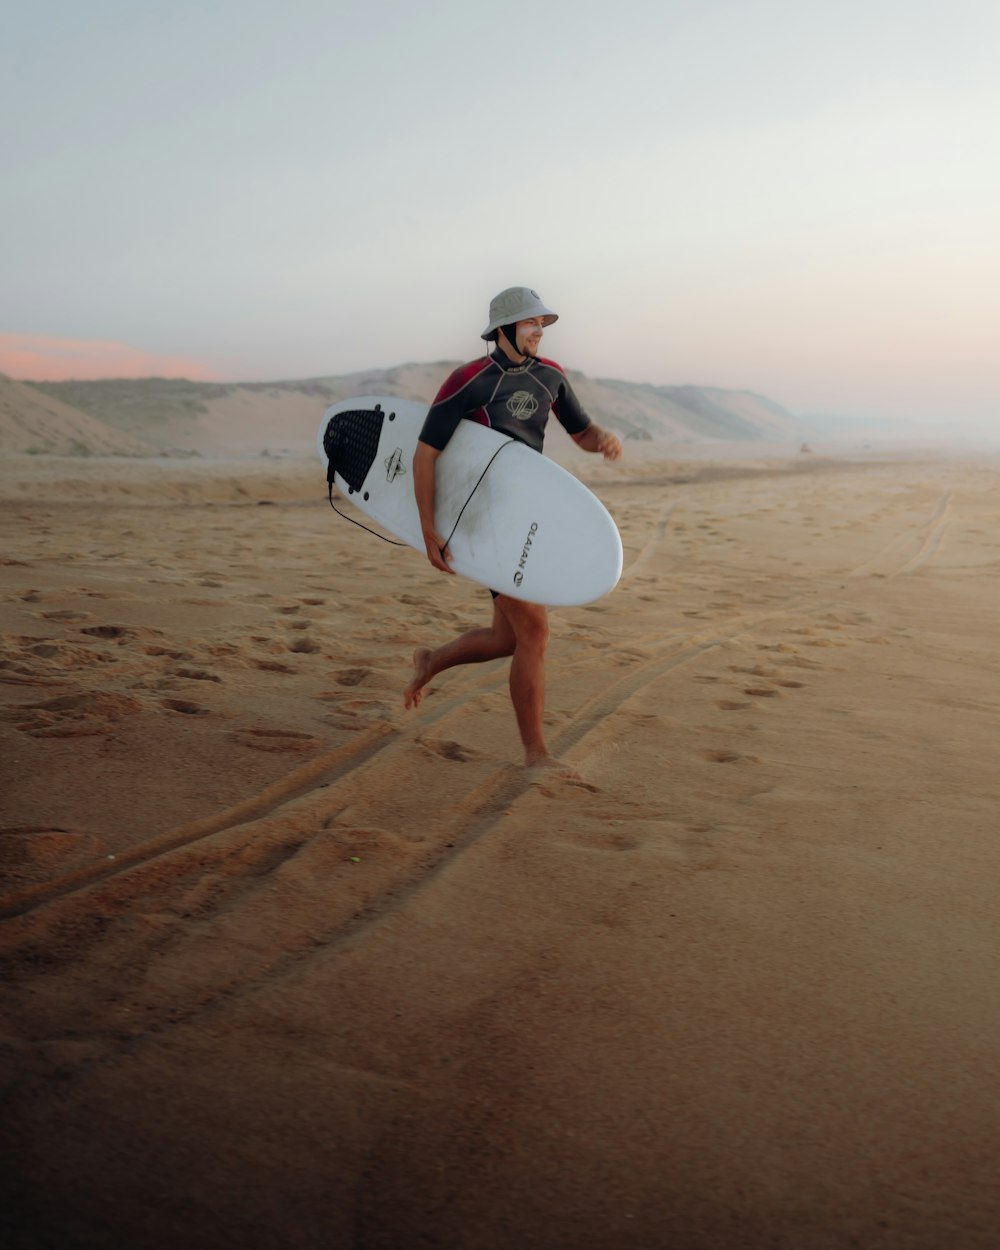 a person carrying a surfboard on a sandy beach